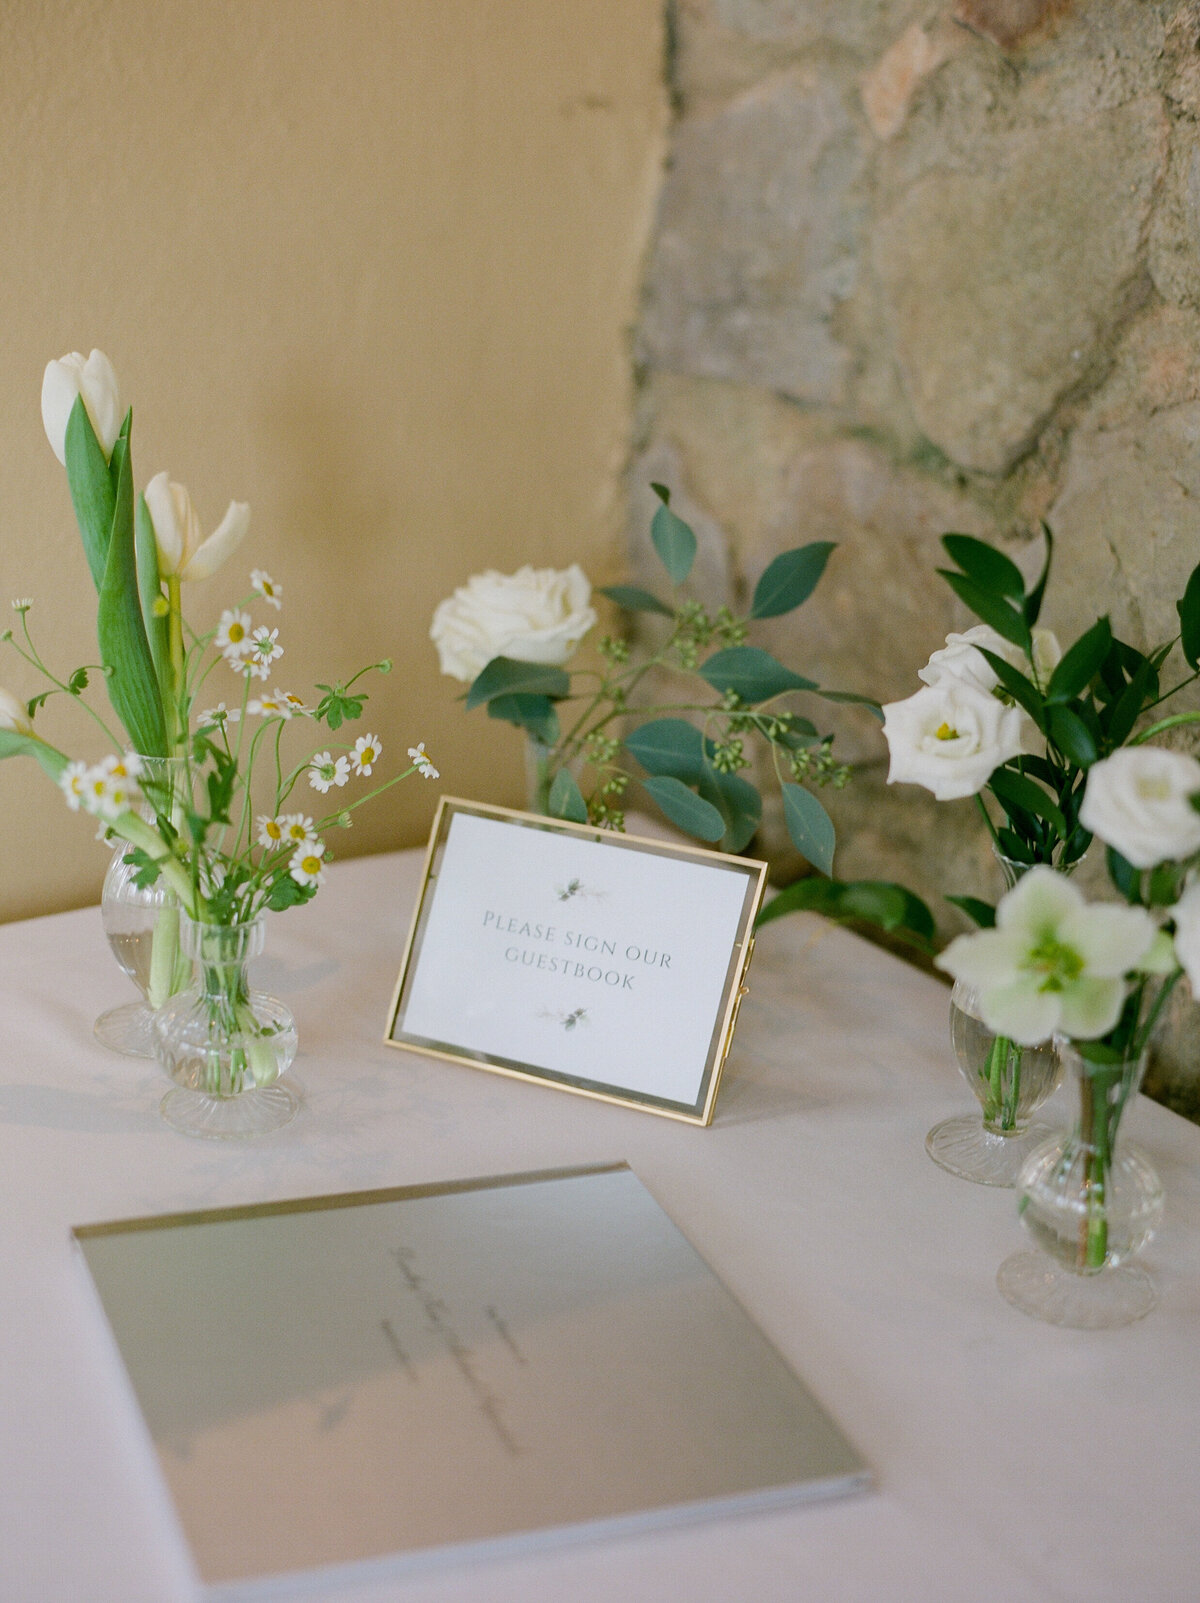 du_soleil_photographie_pomme_radnor_peachtree_catering_wedding_doromike_ceremony-16